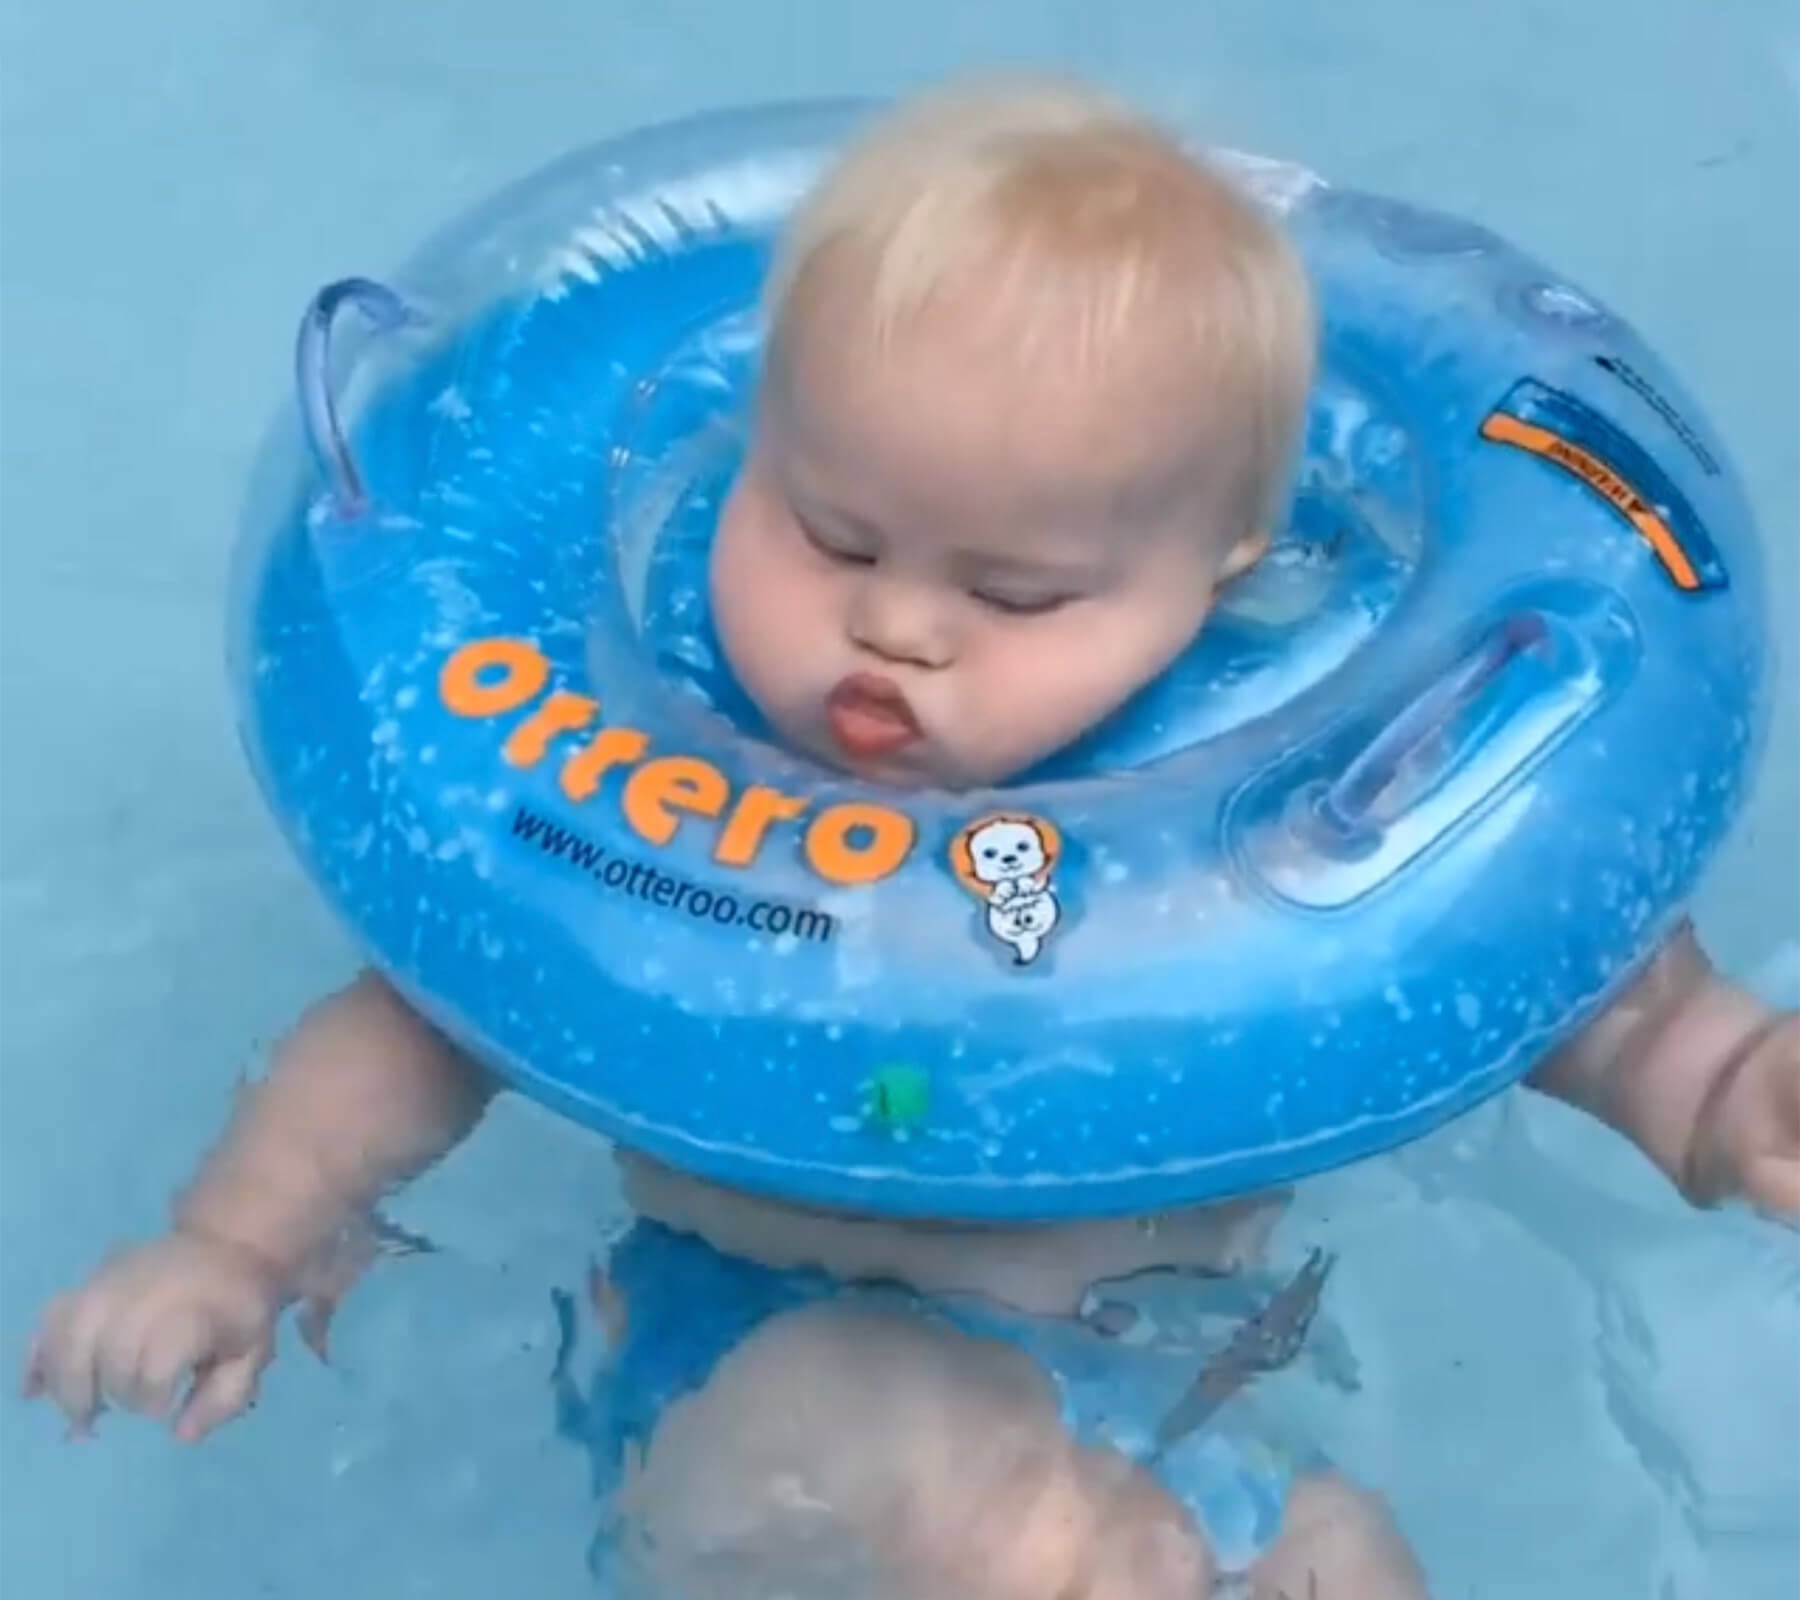 Mom of Baby With Down Syndrome Shares Why She Bought an Otteroo